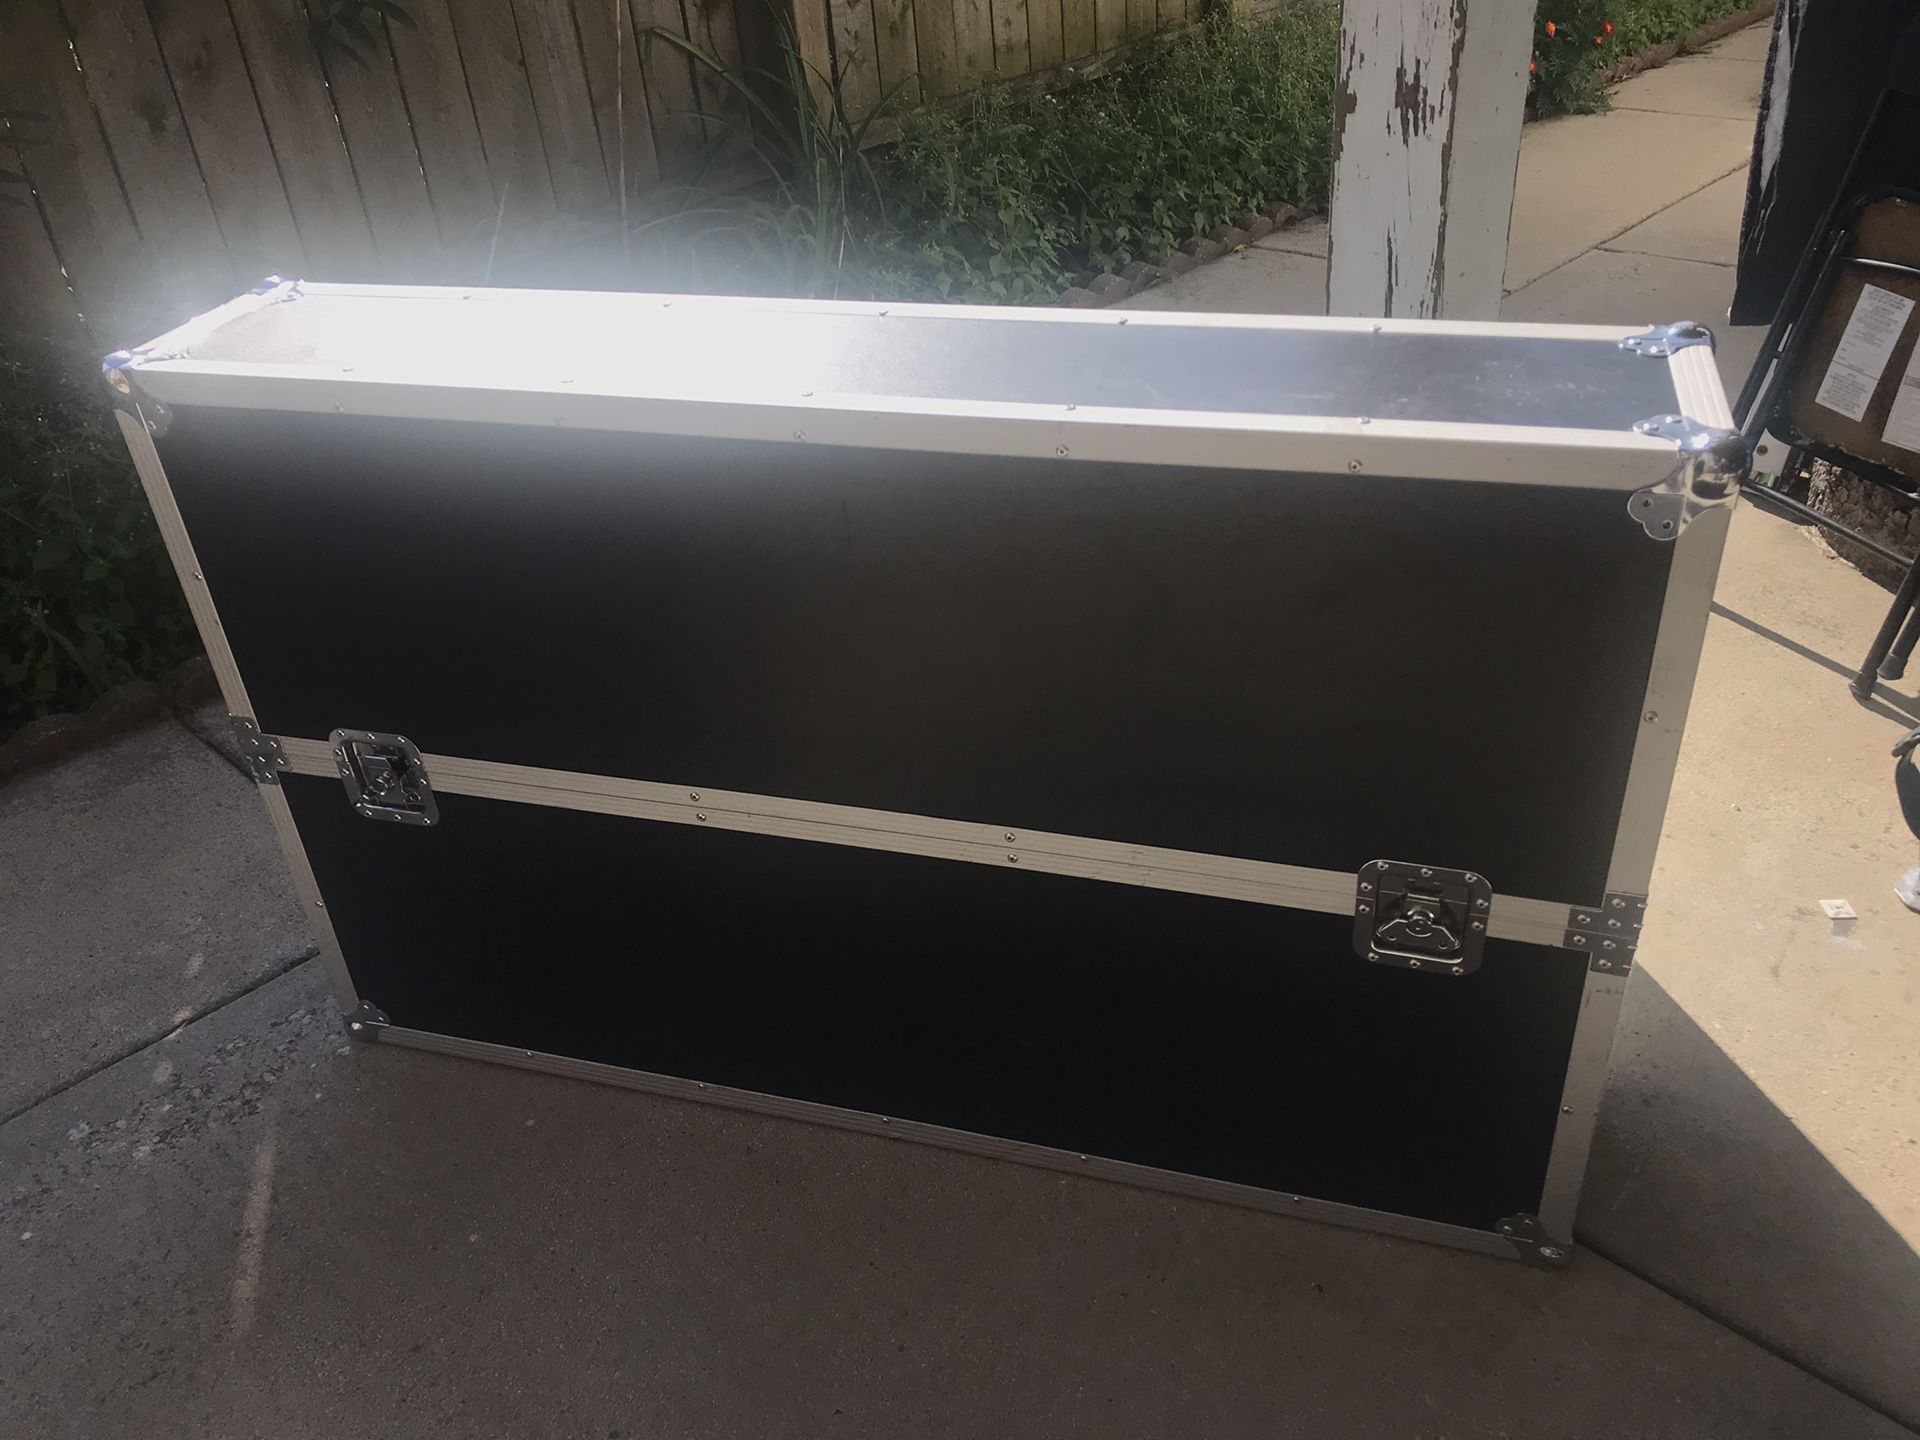 Road case for tv 55” no wheels